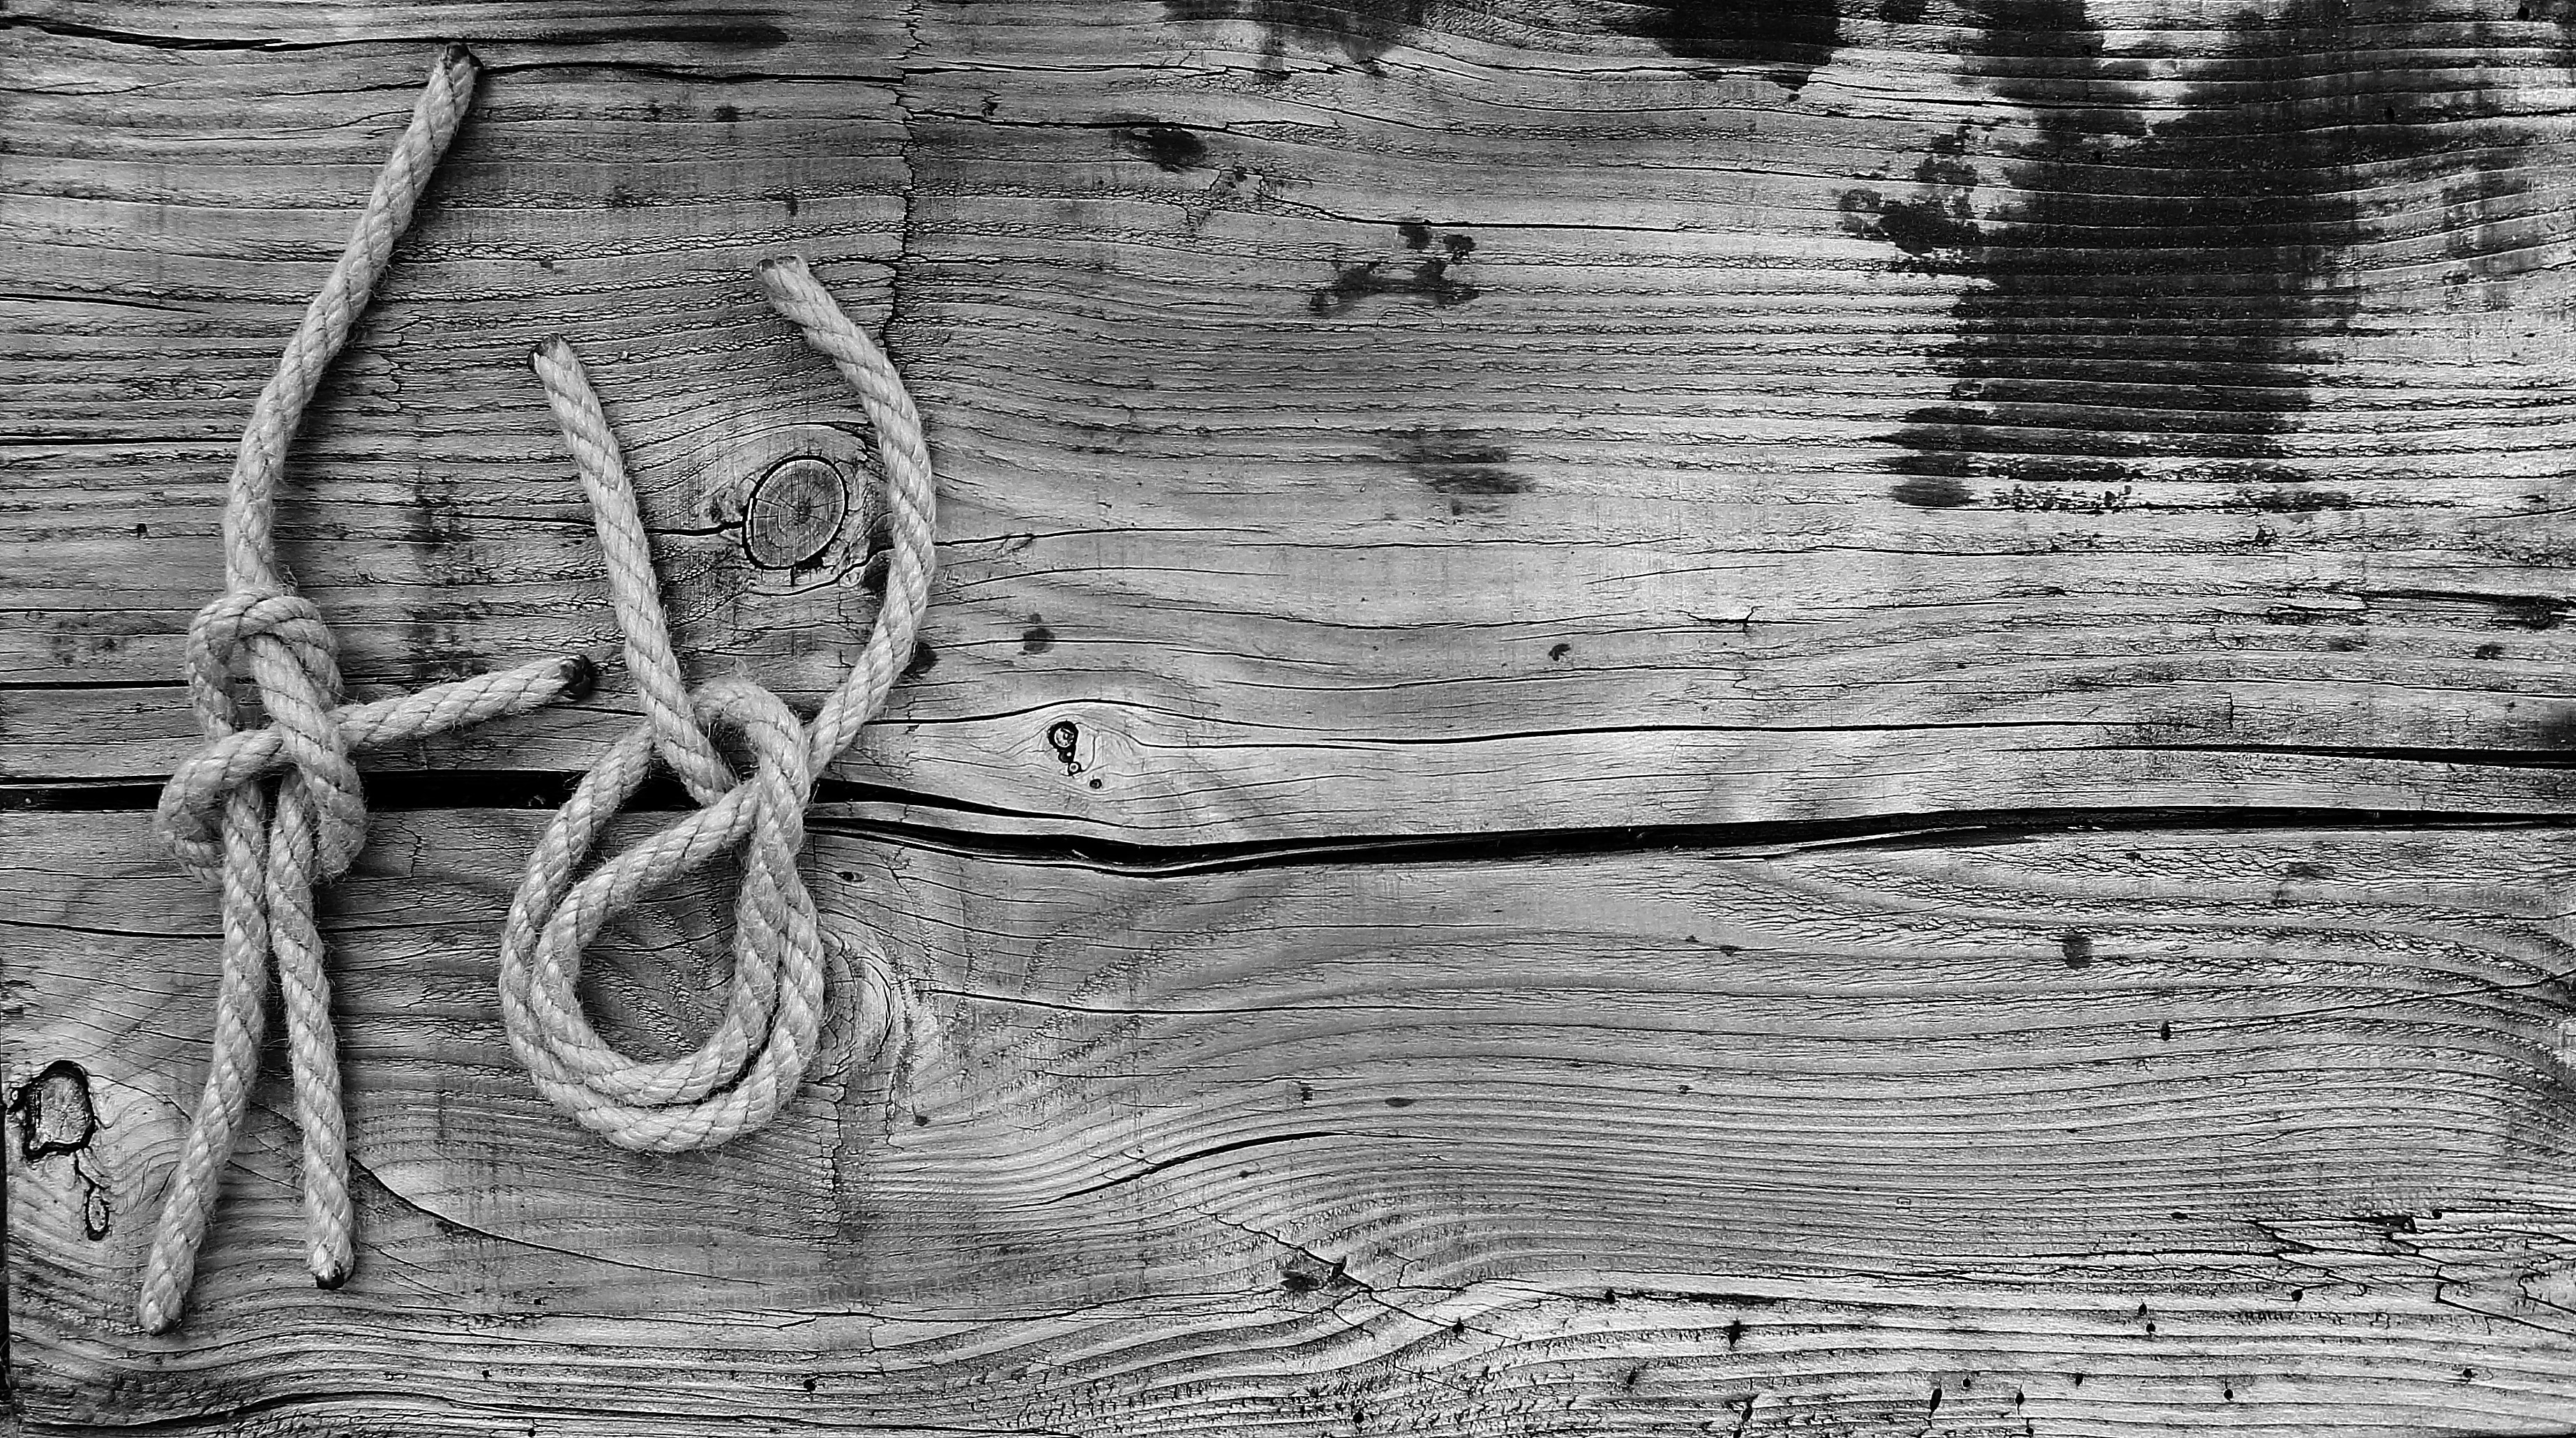 gray scale photo of wood and ropes